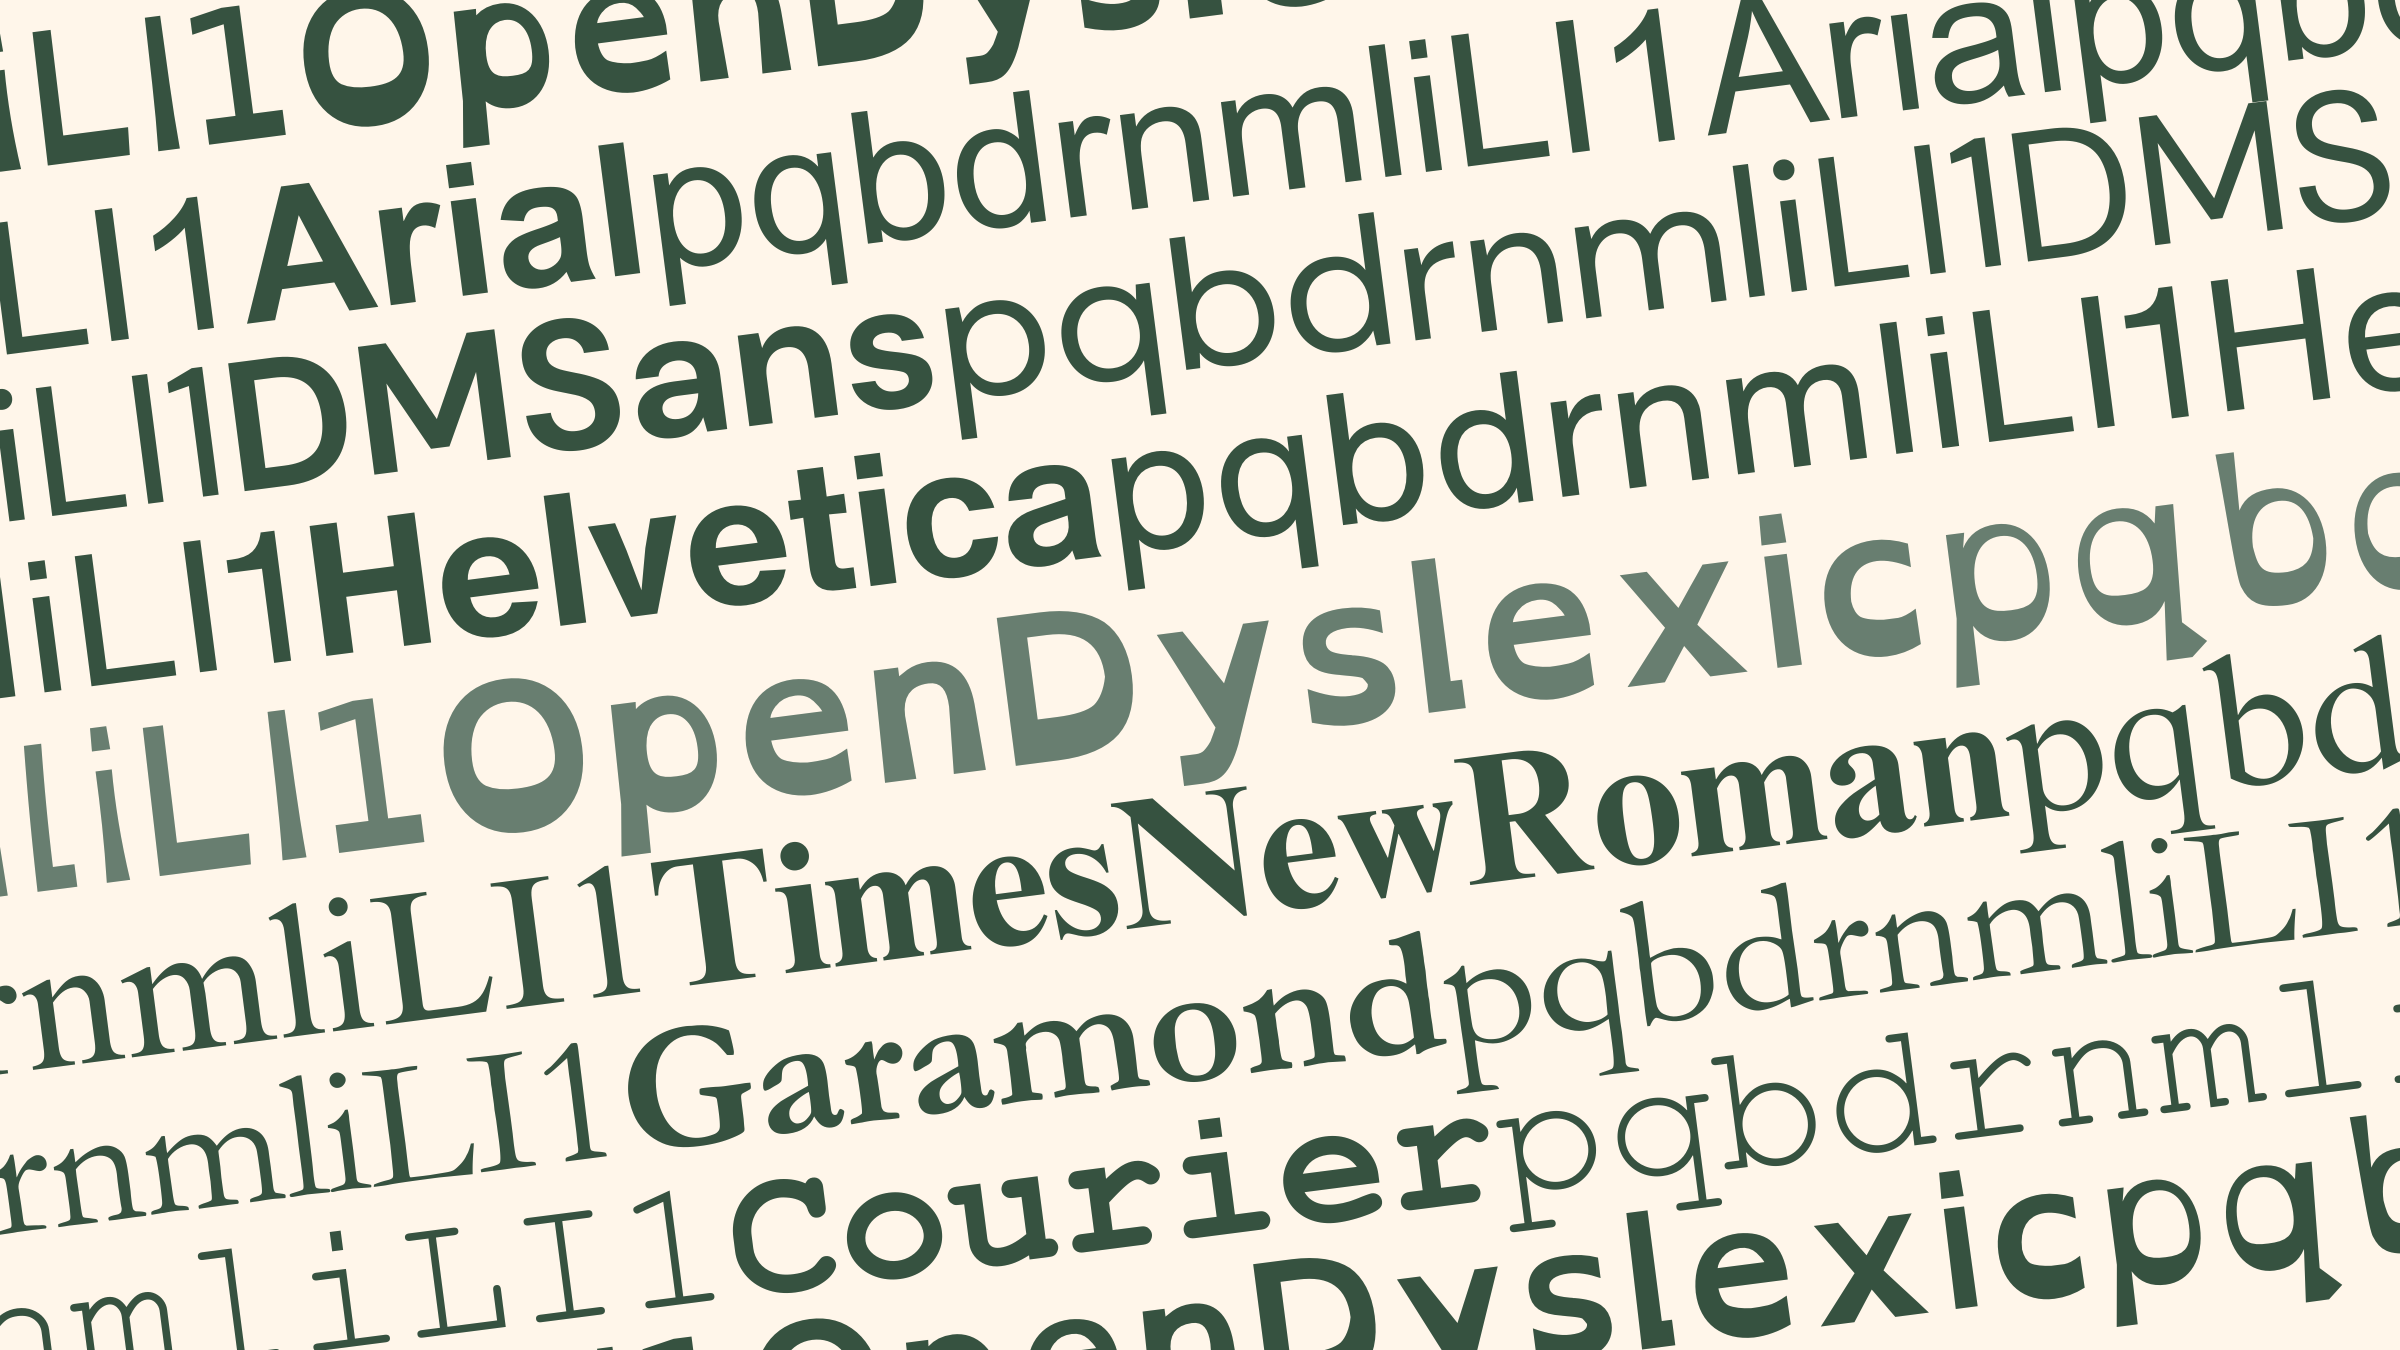 Comparison of popular san serif (Arial, DM Sans, Helvetics), serif fonts (Times New Roman, Garamond, and Courier) with OpenDyslexic